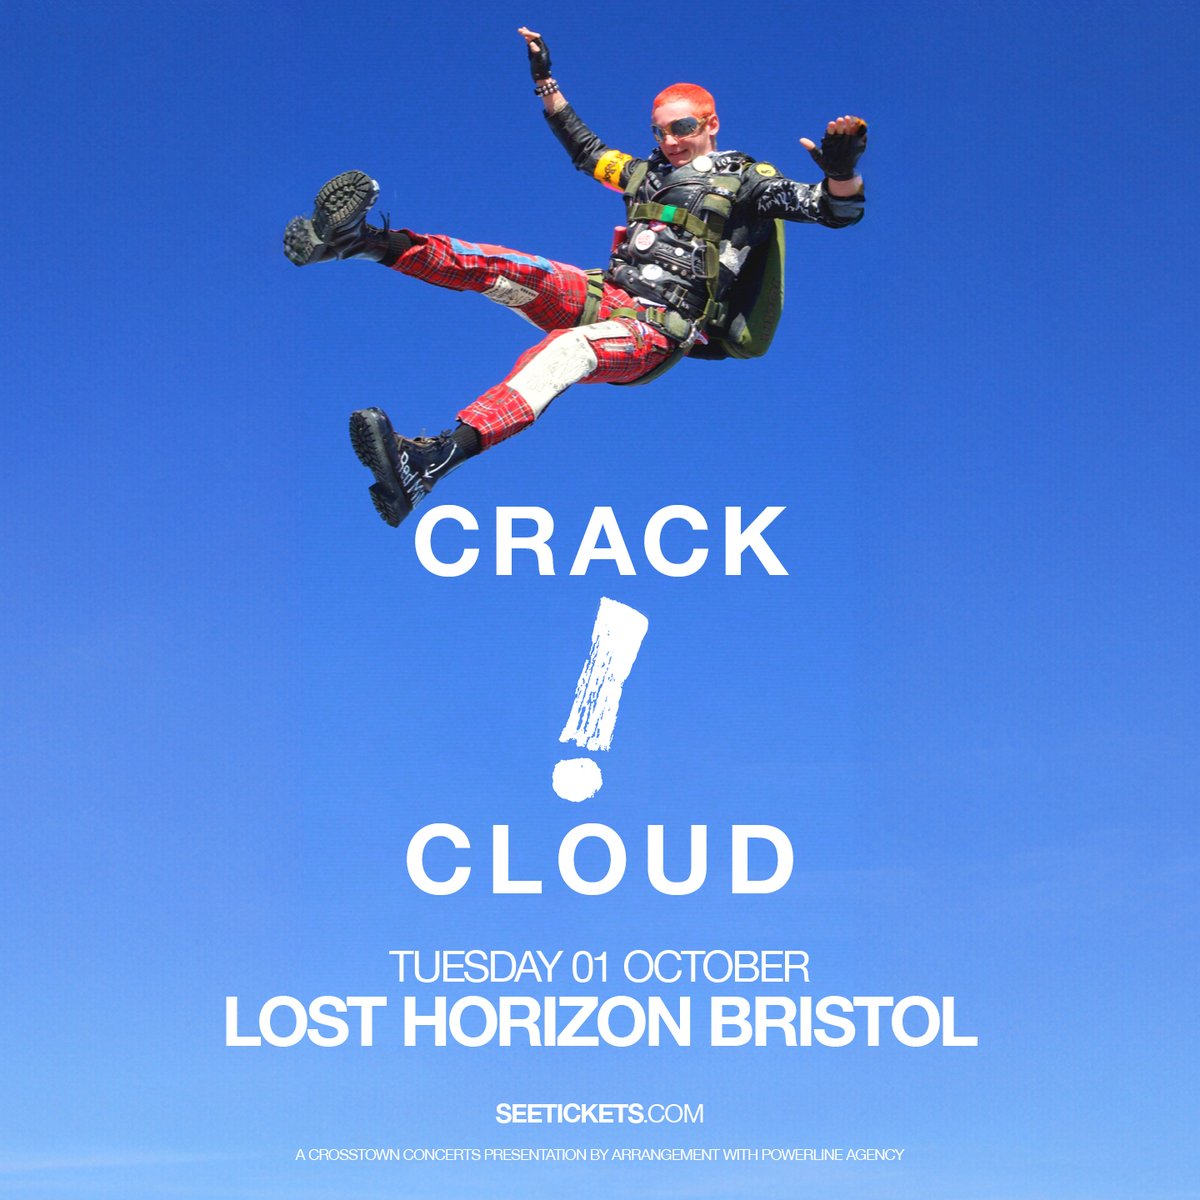 Tickets are on sale now for Crack Cloud at @LostHorizonHQ. crosstownconcerts.seetickets.com/event/crack-cl…